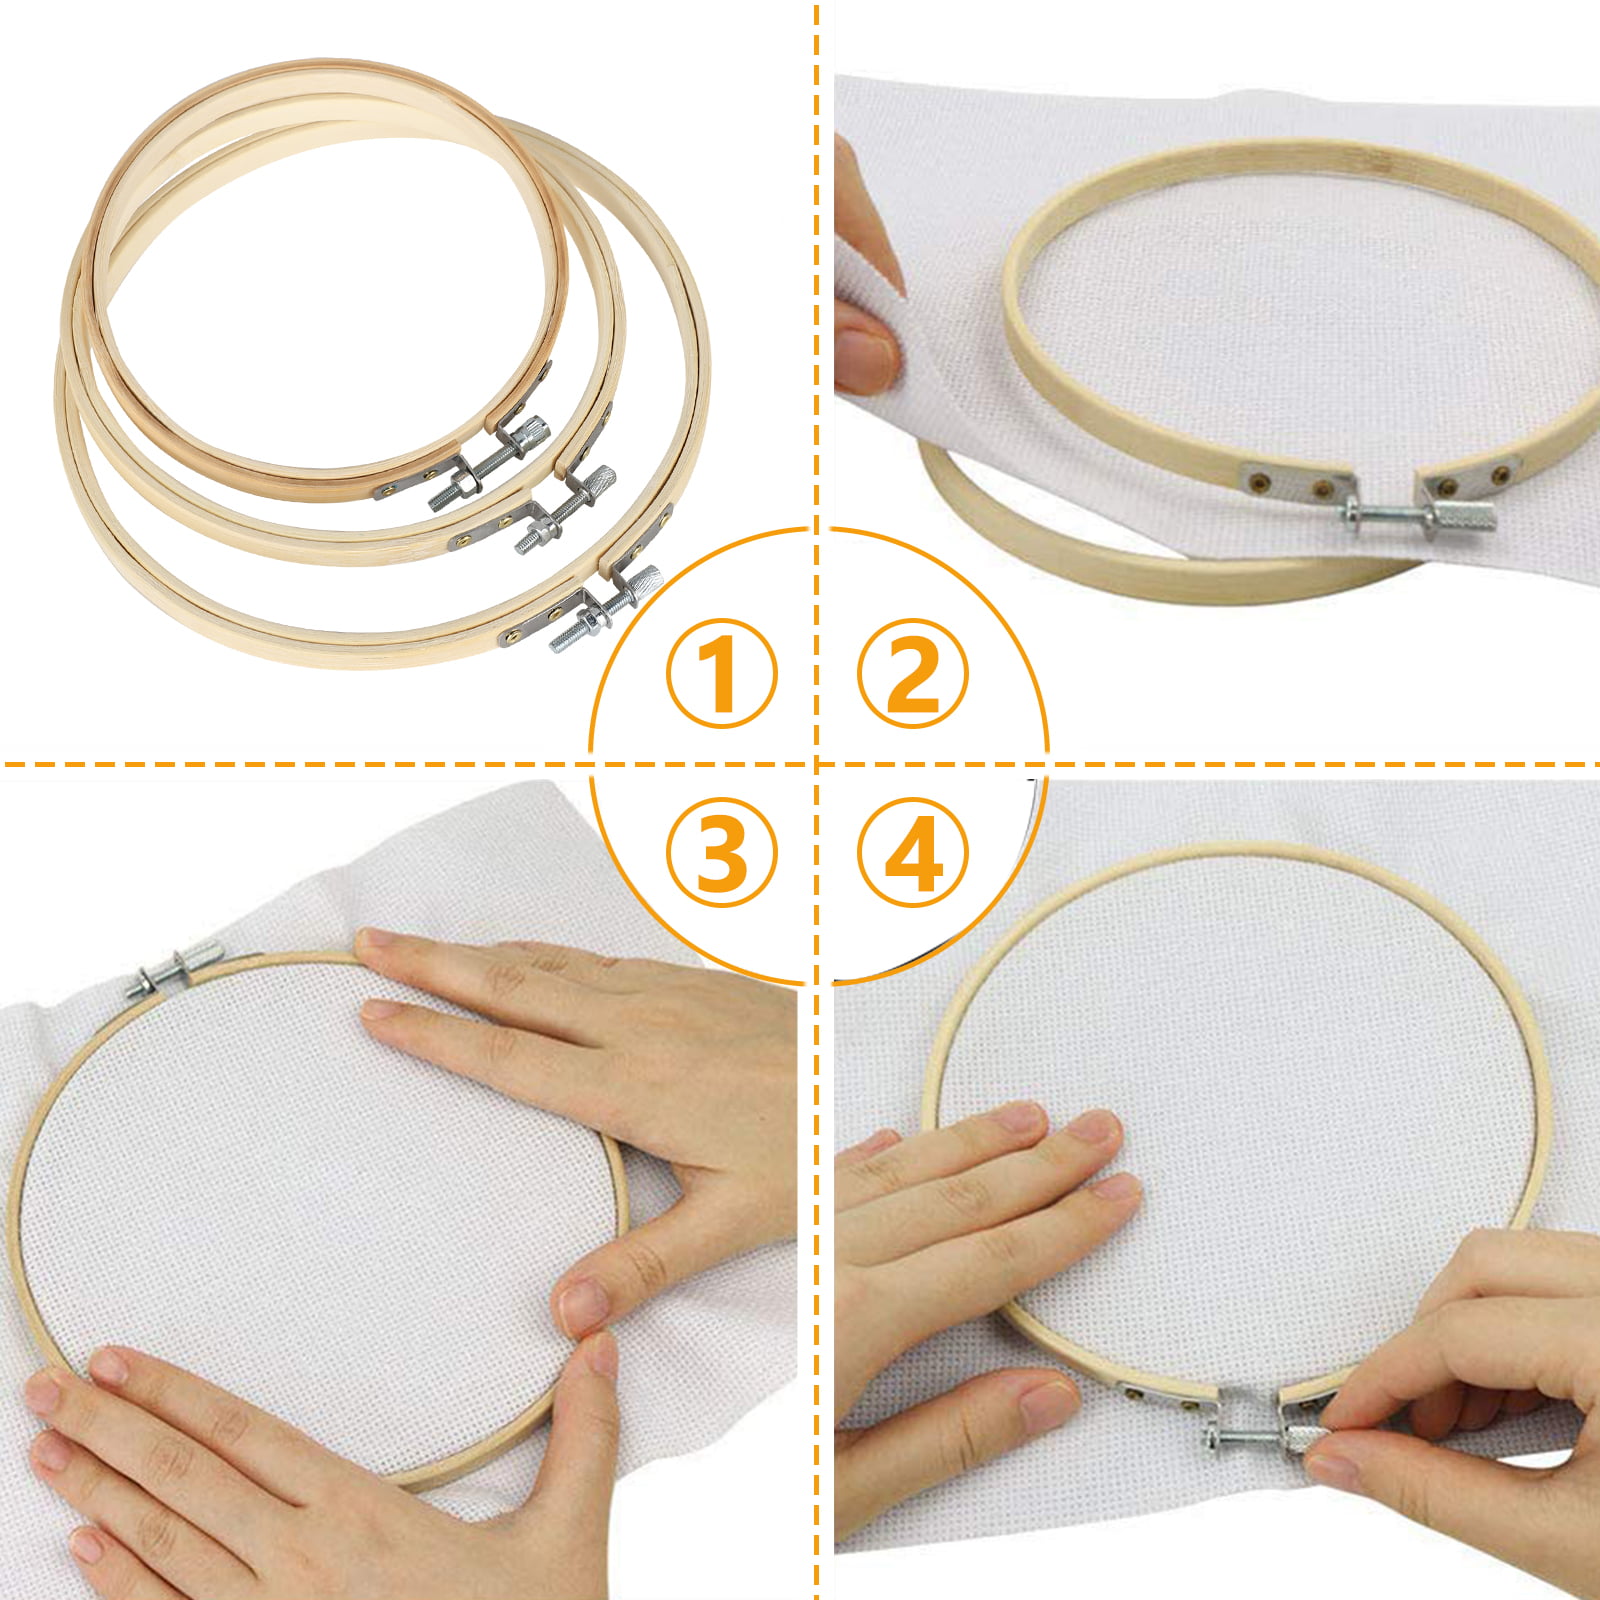 Essentials by Leisure Arts Wood Embroidery Hoop 3 Bamboo - wooden hoops  for crafts - embroidery hoop holder - cross stitch hoop - cross stitch  hoops